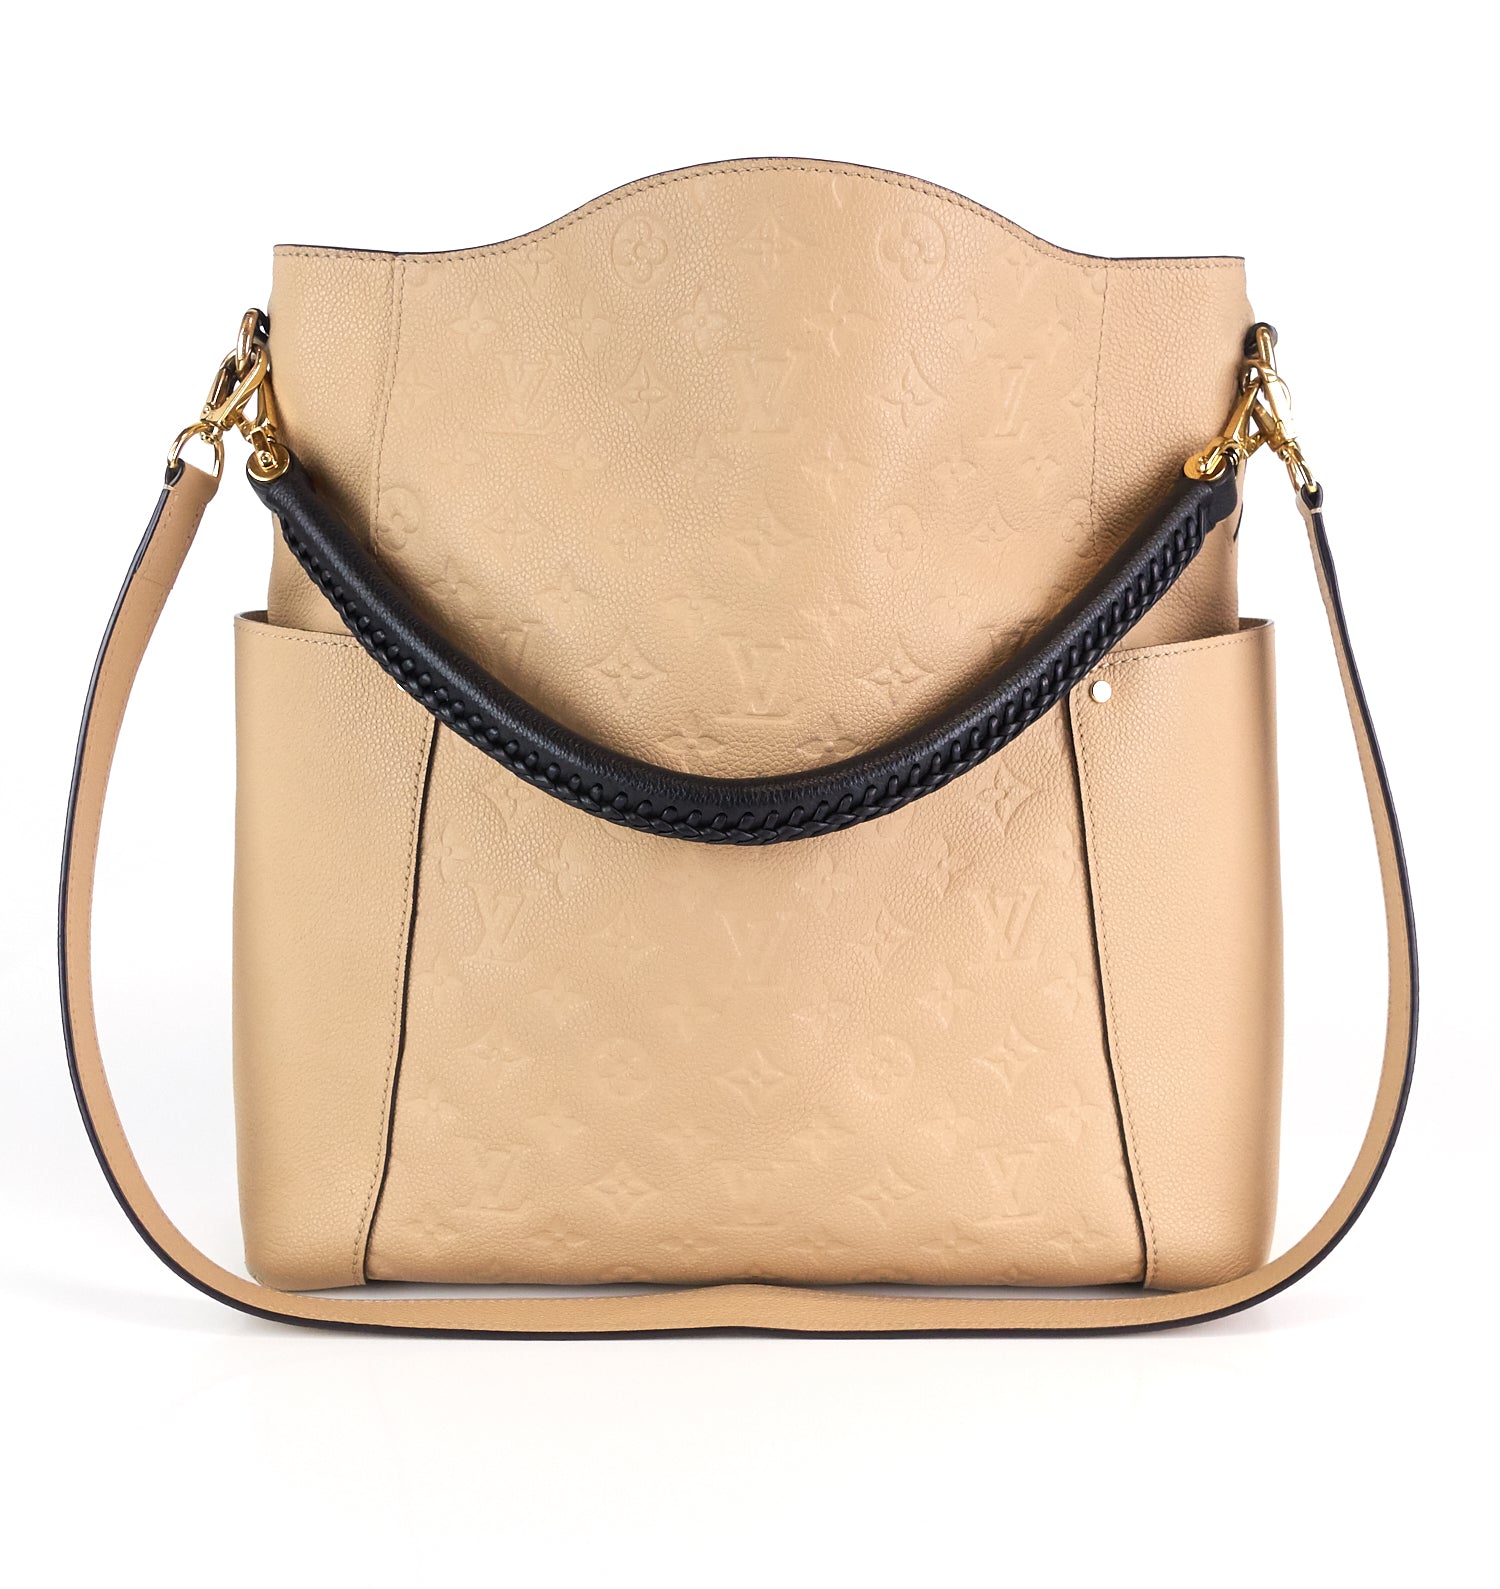 Louis Vuitton Bagatelle BB Mini Hobo bag in Monogram Different-Colored  Leather M46113 Beige/Yellow/Pink 2022